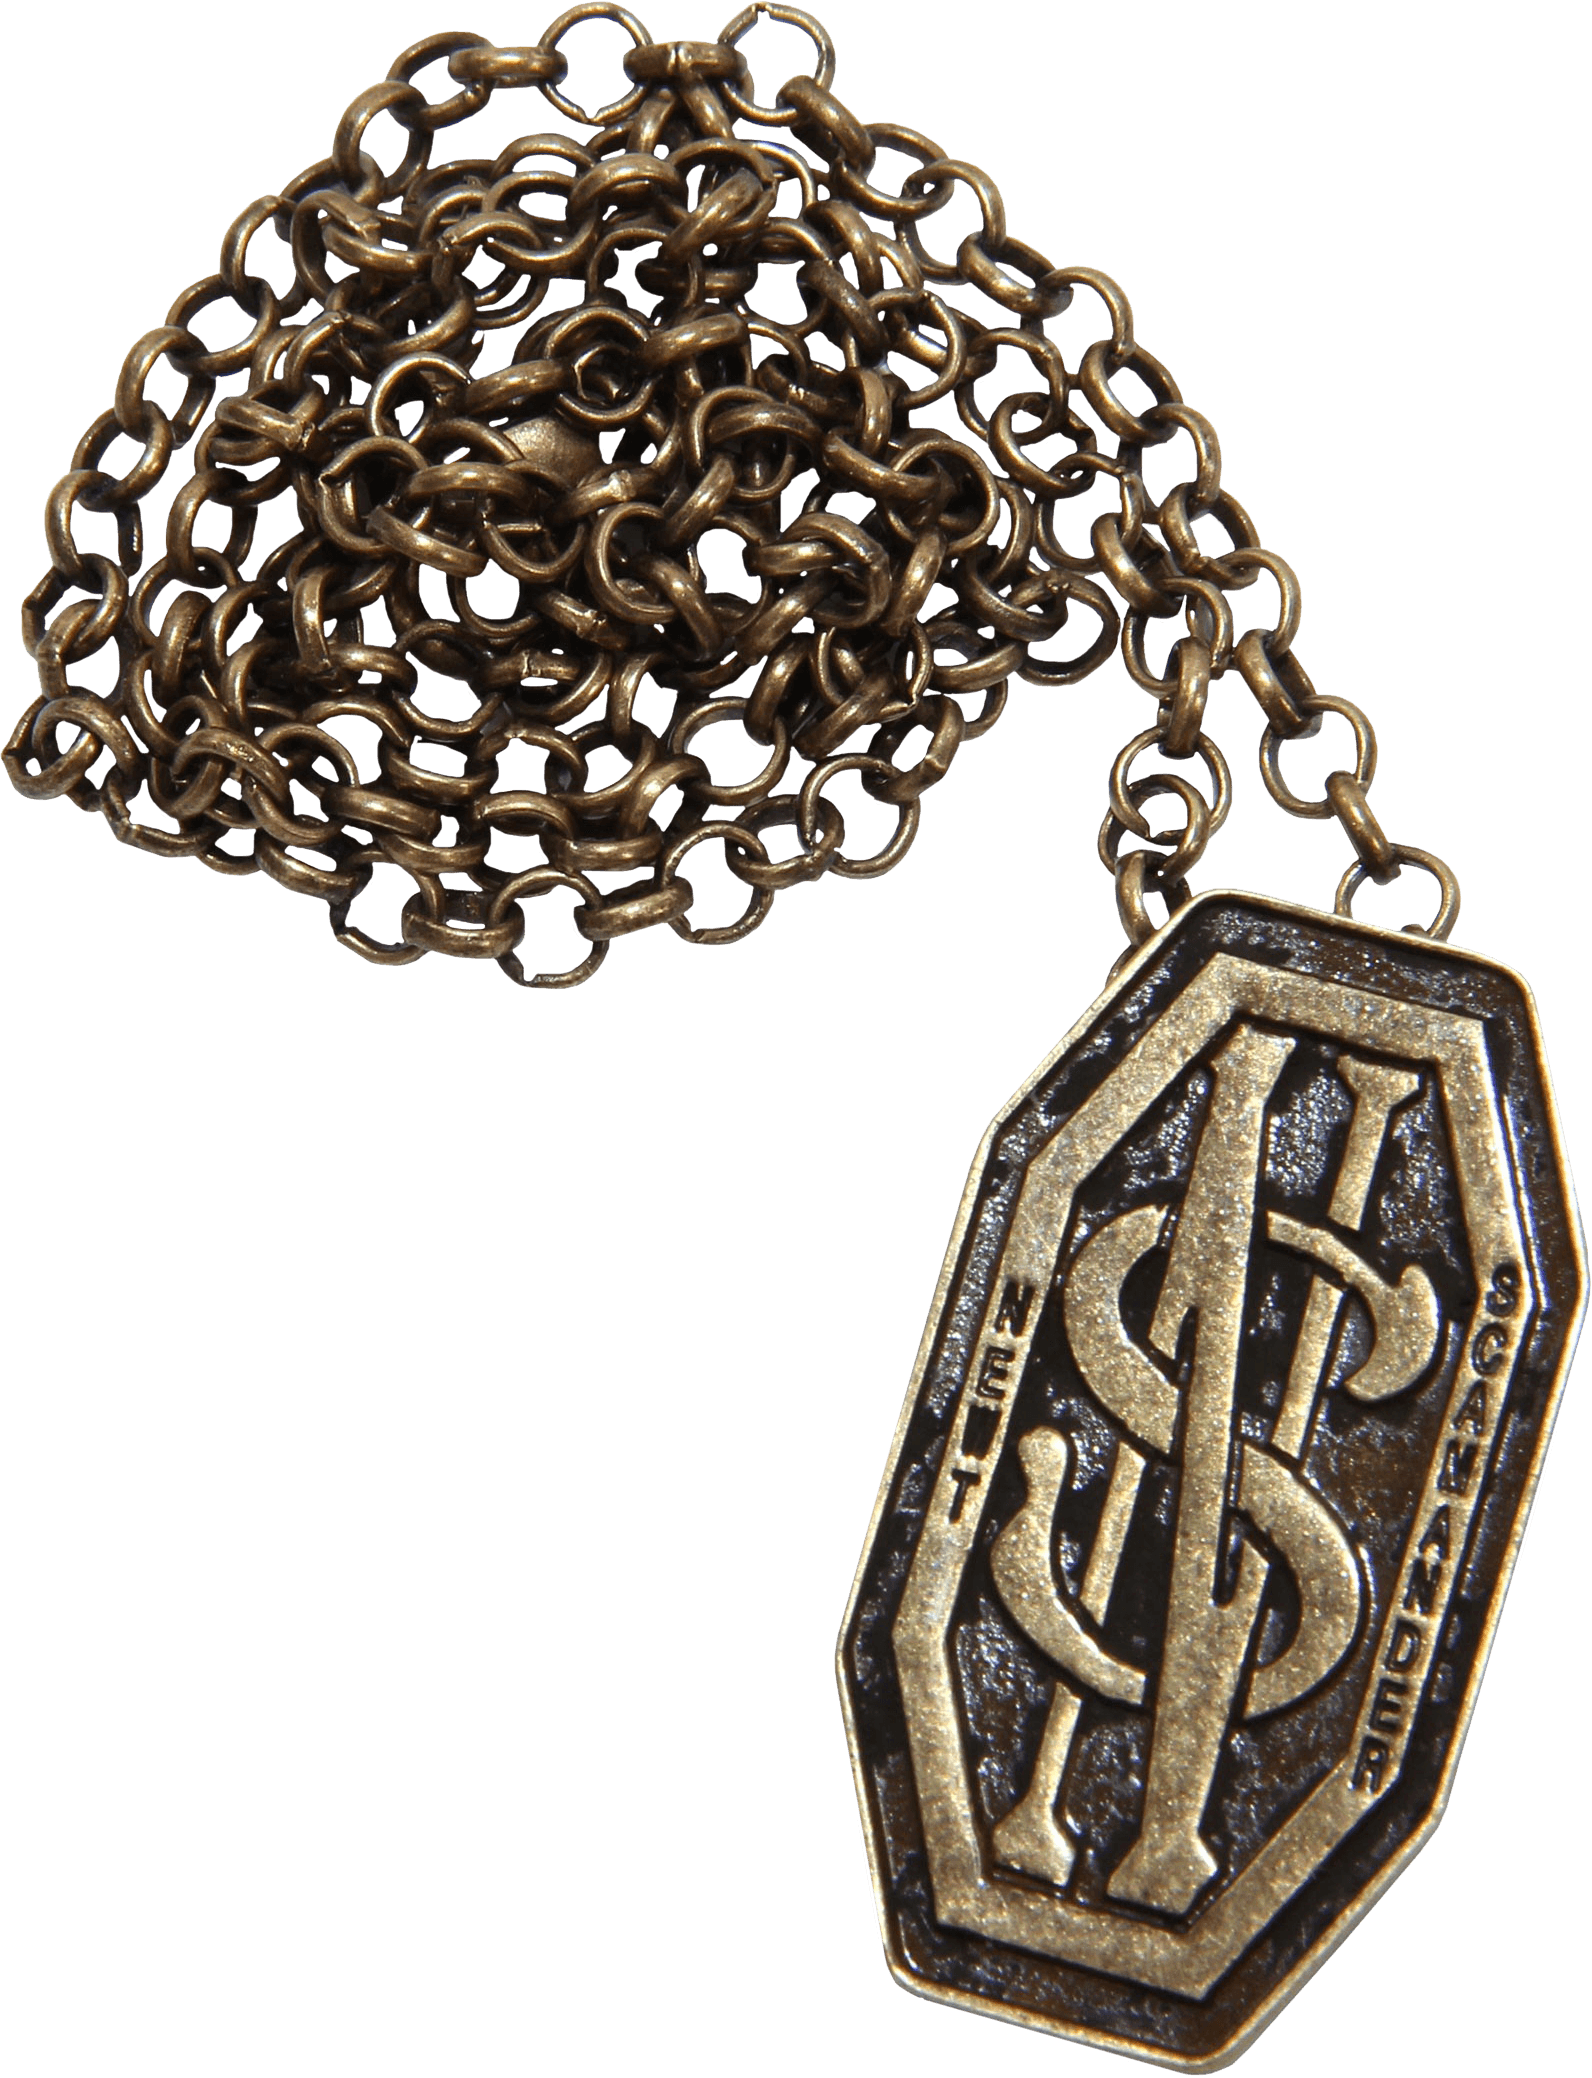 ELO543151 Fantastic Beasts and Where to Find Them - Newt's Monogram Necklace / Pin - Elope - Titan Pop Culture